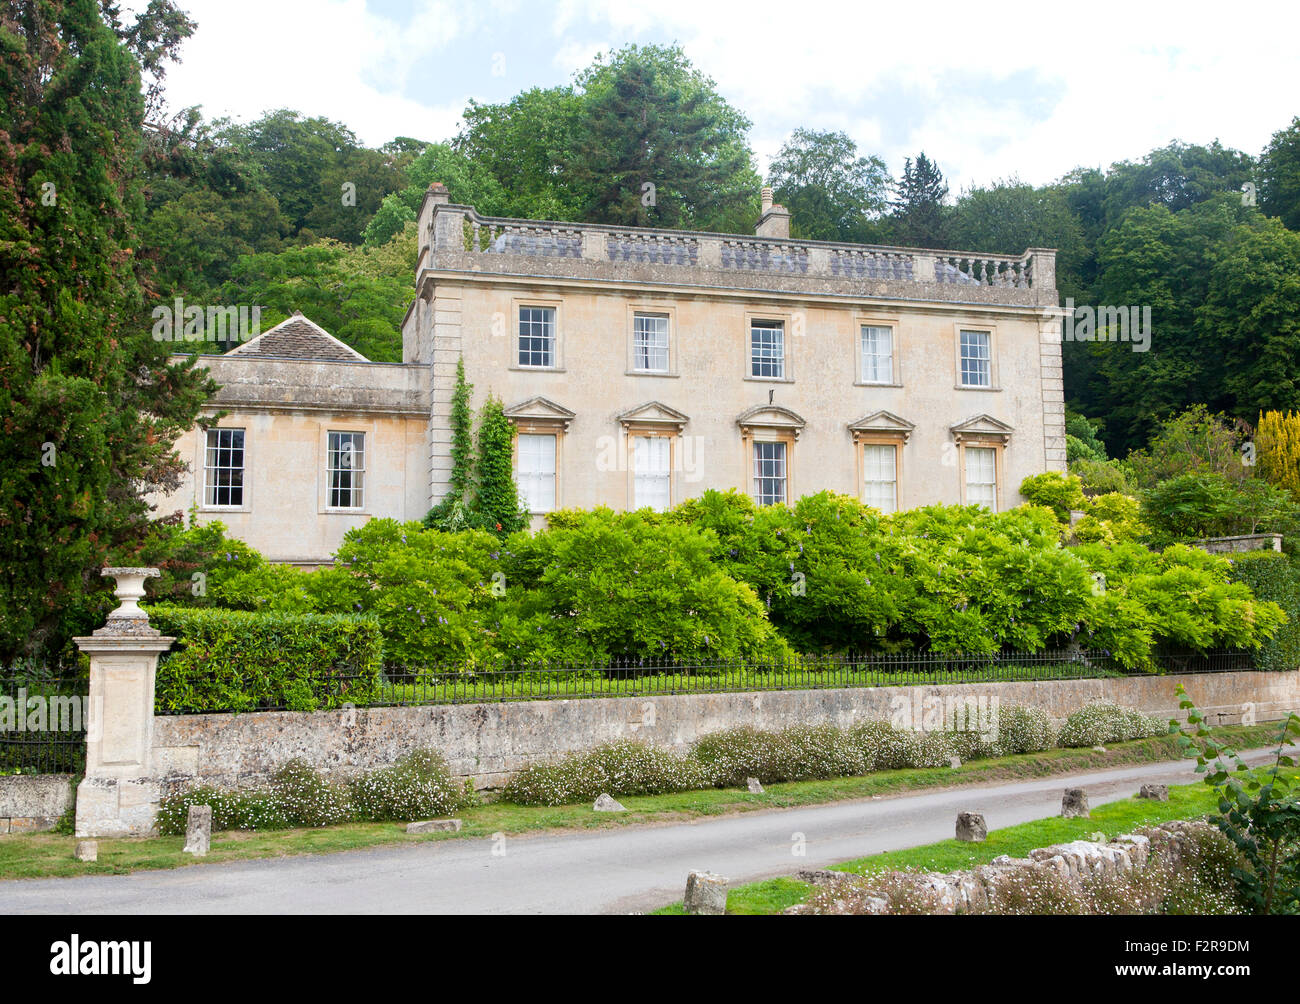 Classical frontage of Iford Manor house, near Bradford on Avon, Wiltshire, England, UK Stock Photo